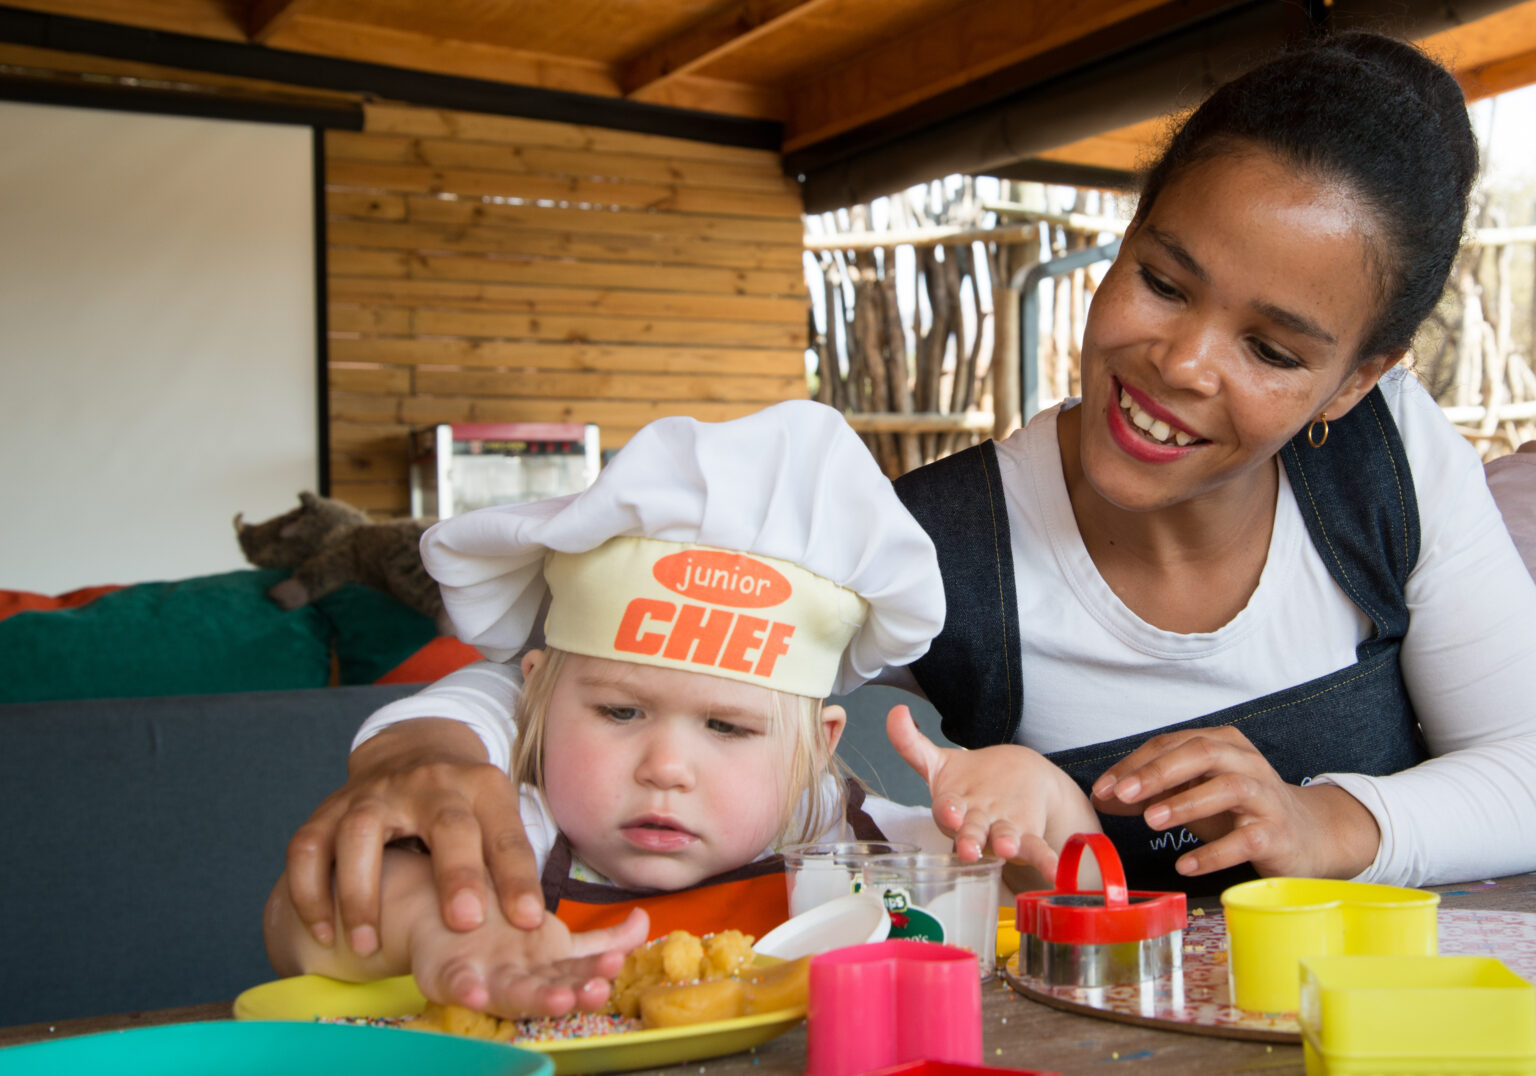 Toddler Chef making cookies with the help of a member of safari camp staff.